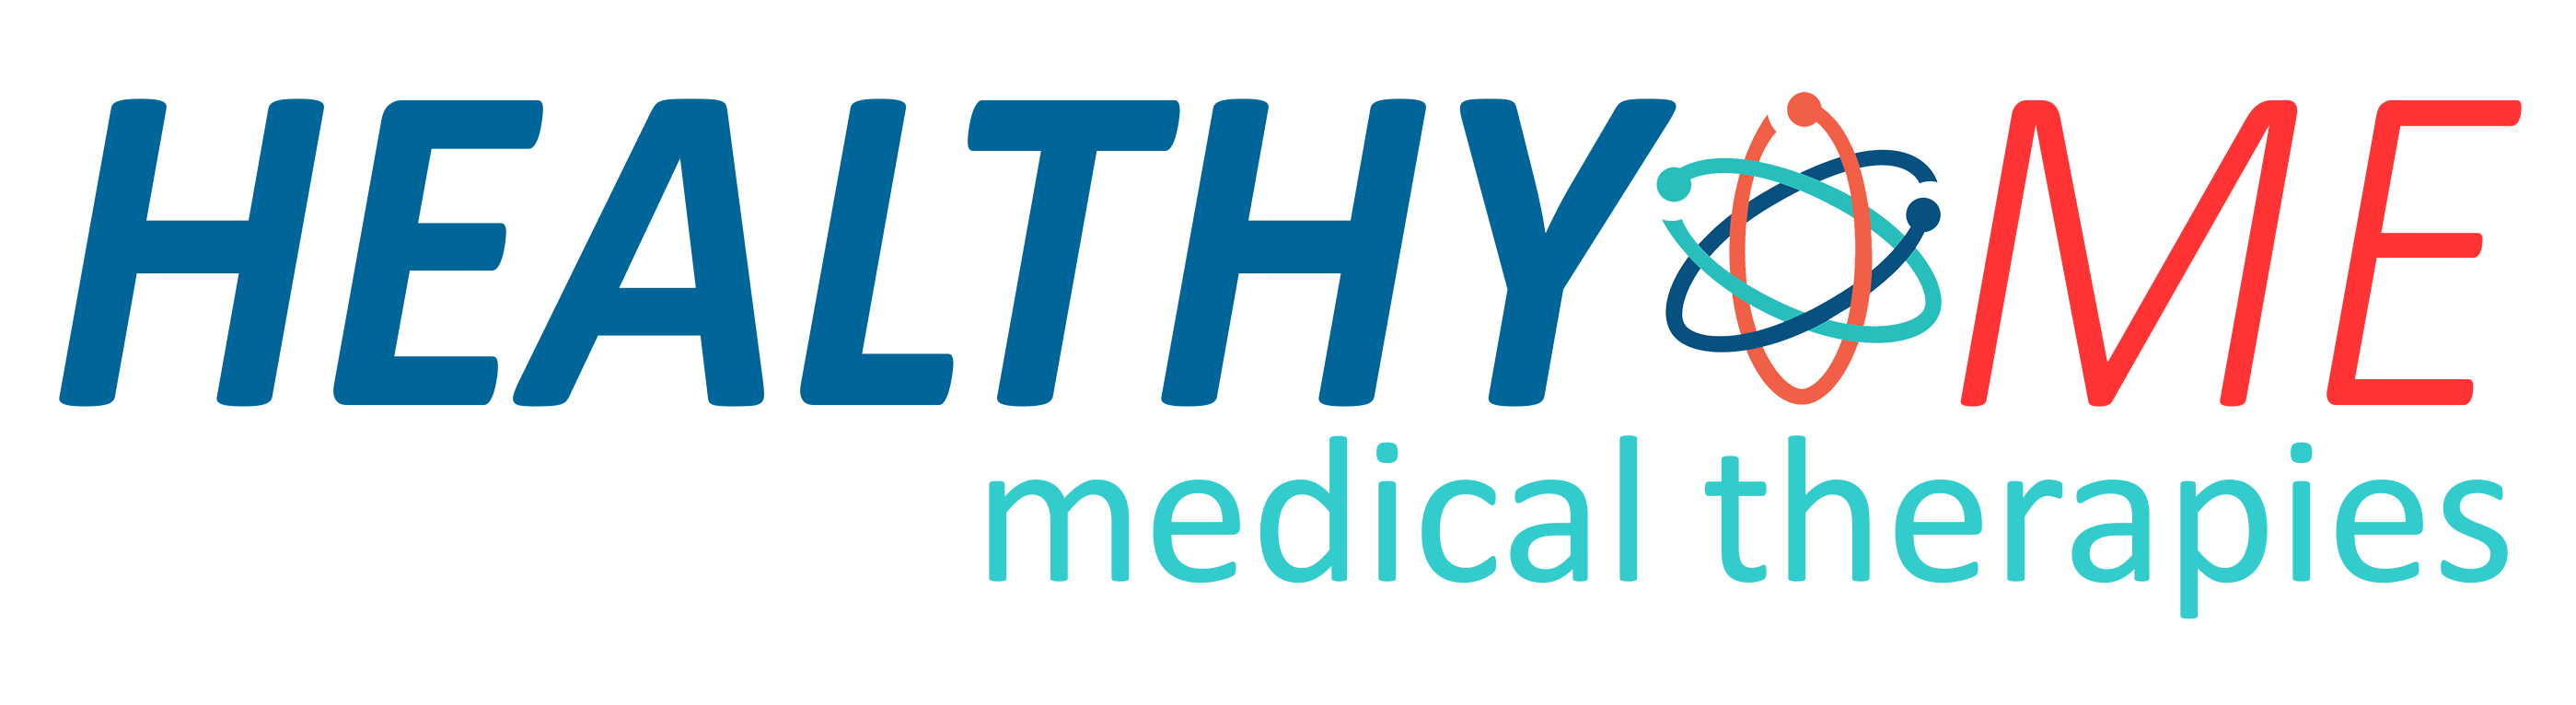 HealthyME Medical Therapies